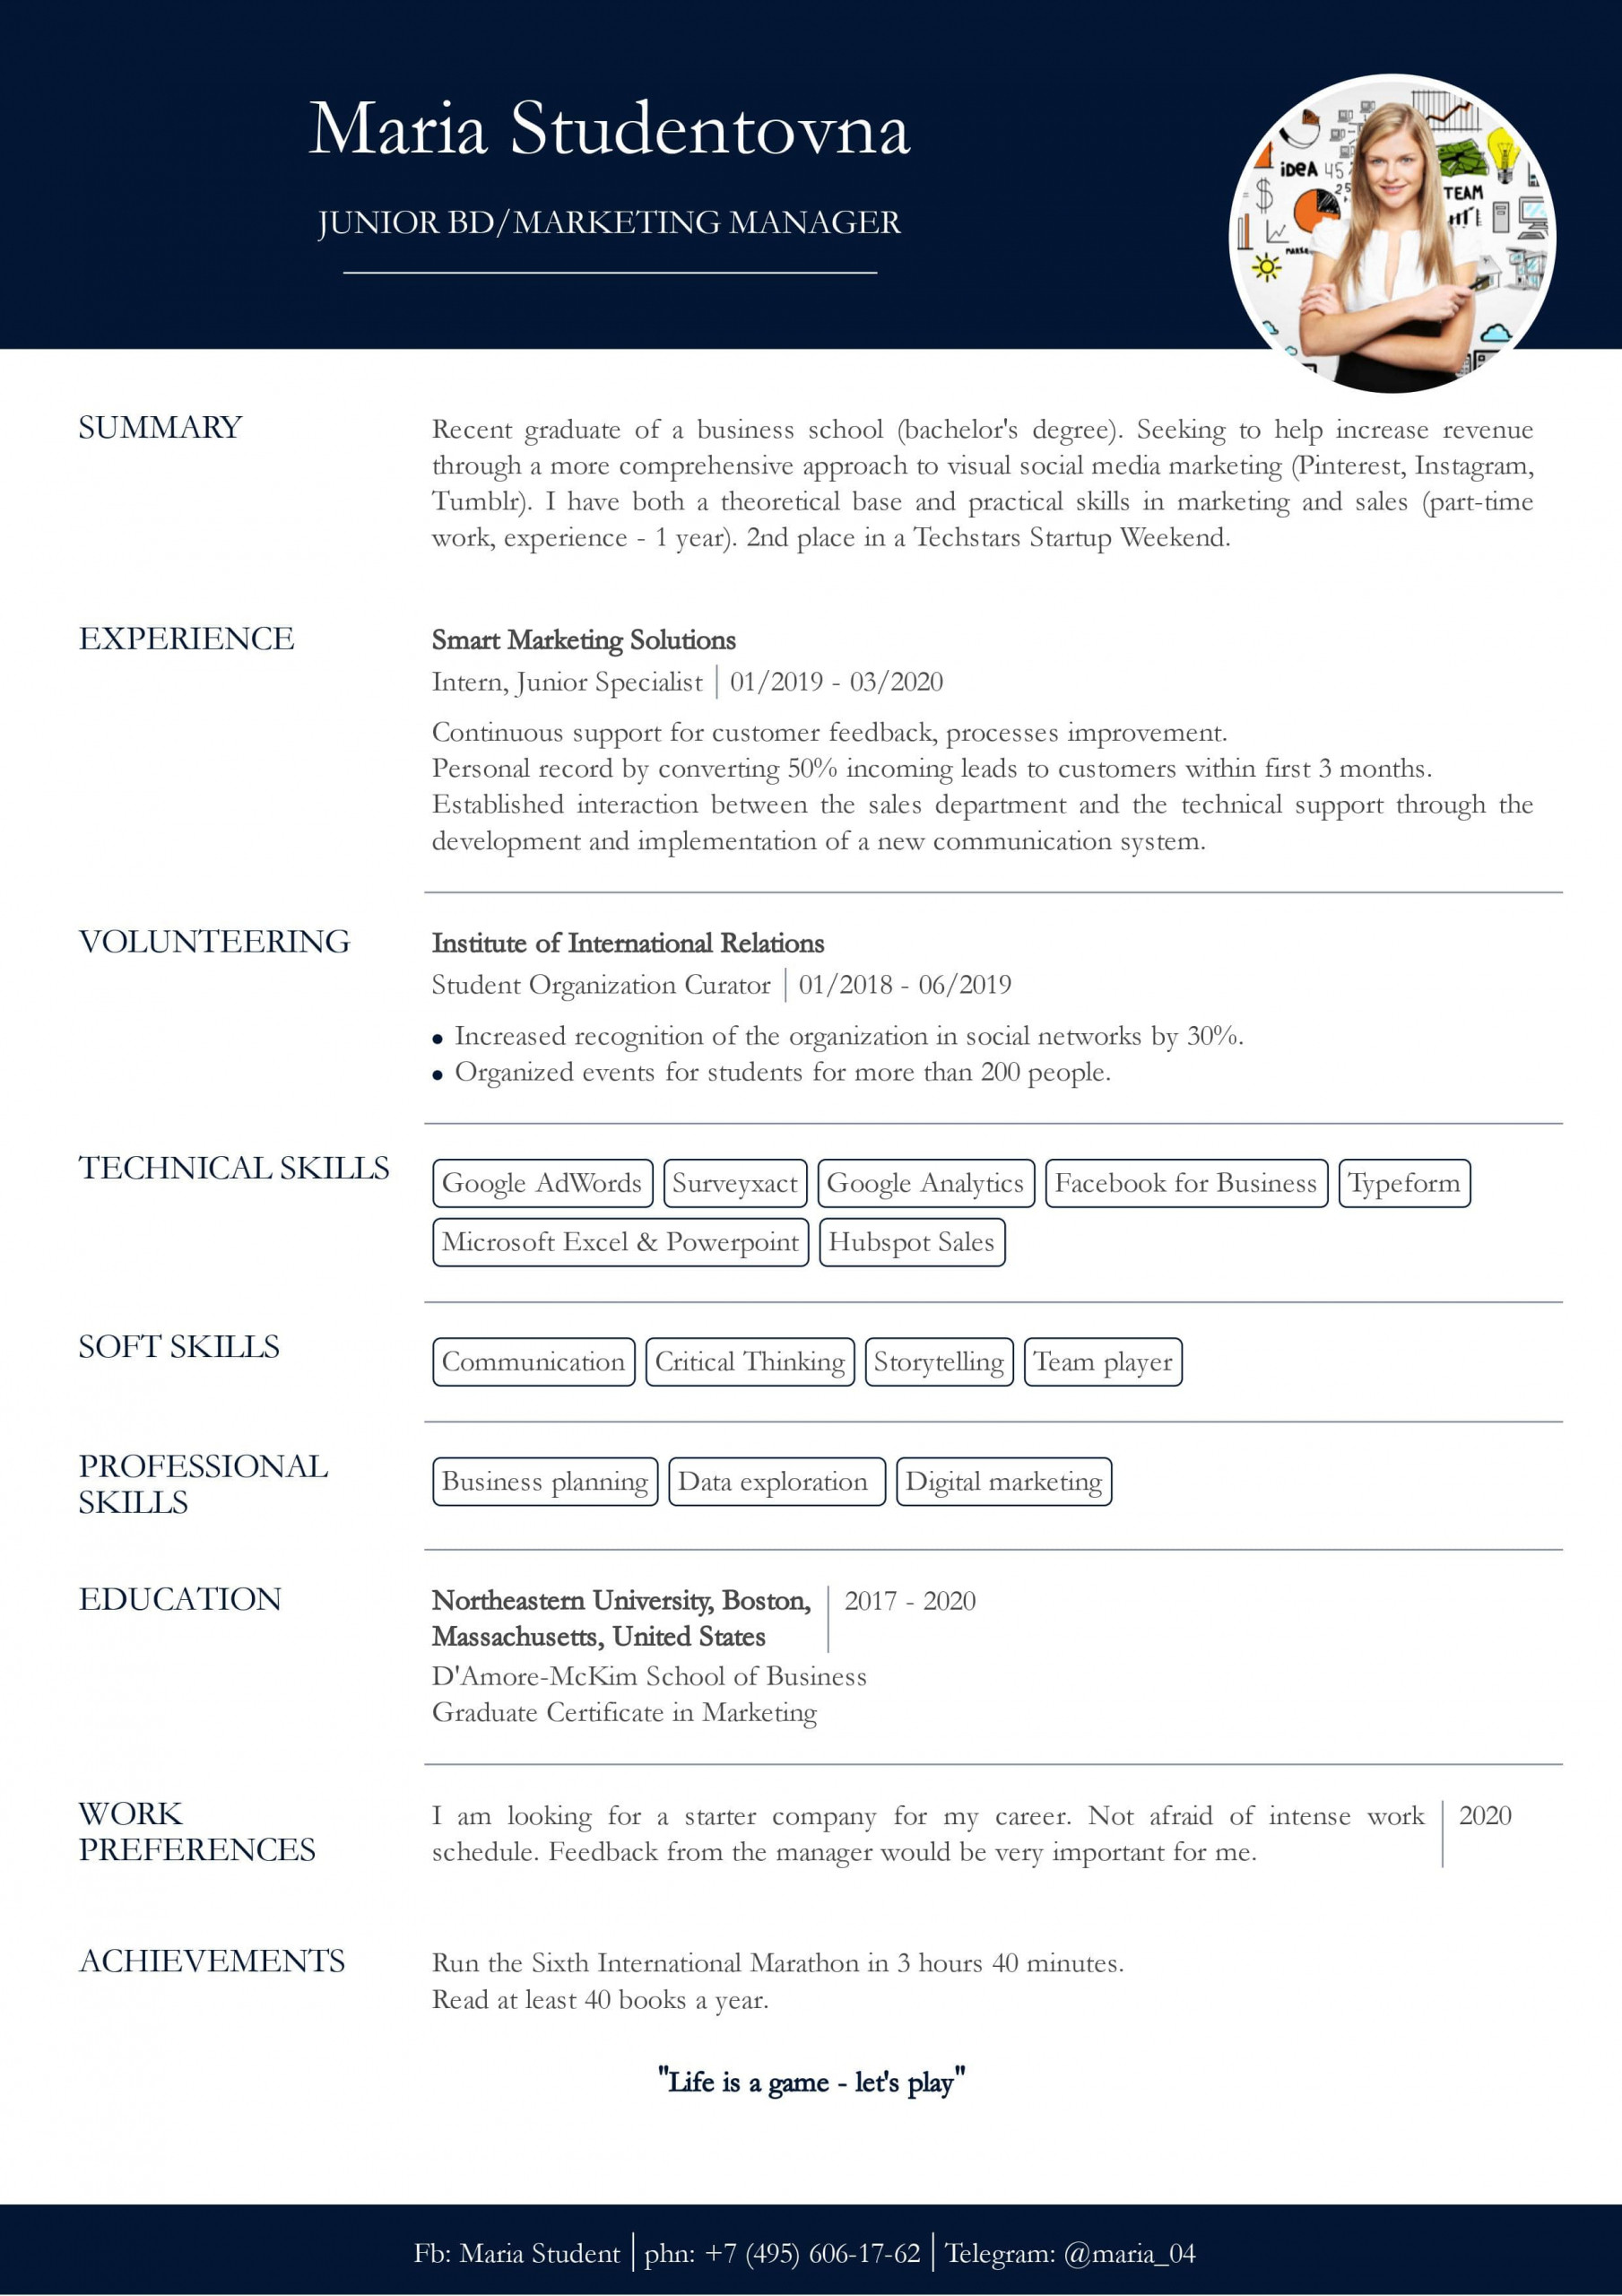 Sample Resume Objectives with No Work Experience Resume with No Work Experience. Sample for Students. – Cv2you Blog